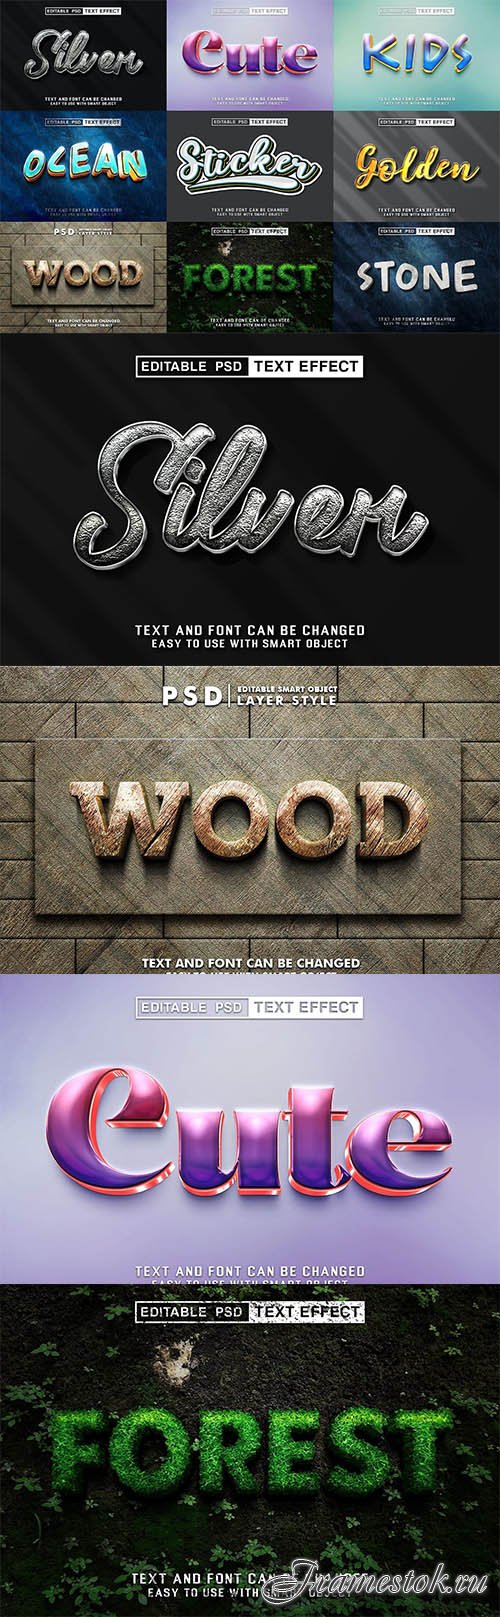 9 Styles of Editable Psd Text Effect